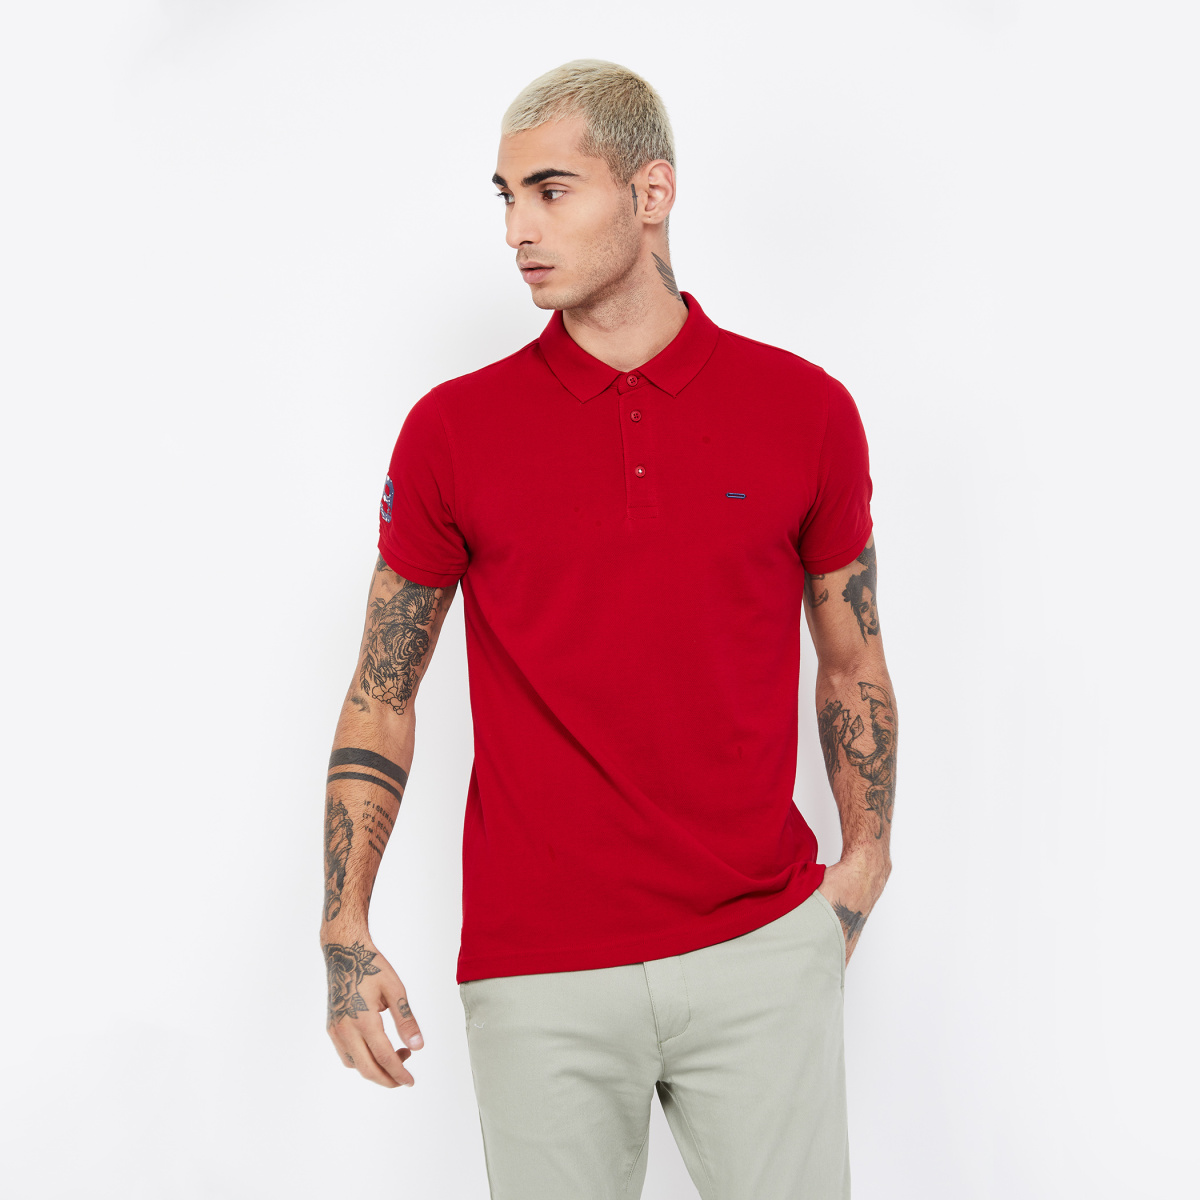 SPYKAR Solid Slim Fit Polo T-shirt, Lifestyle Stores